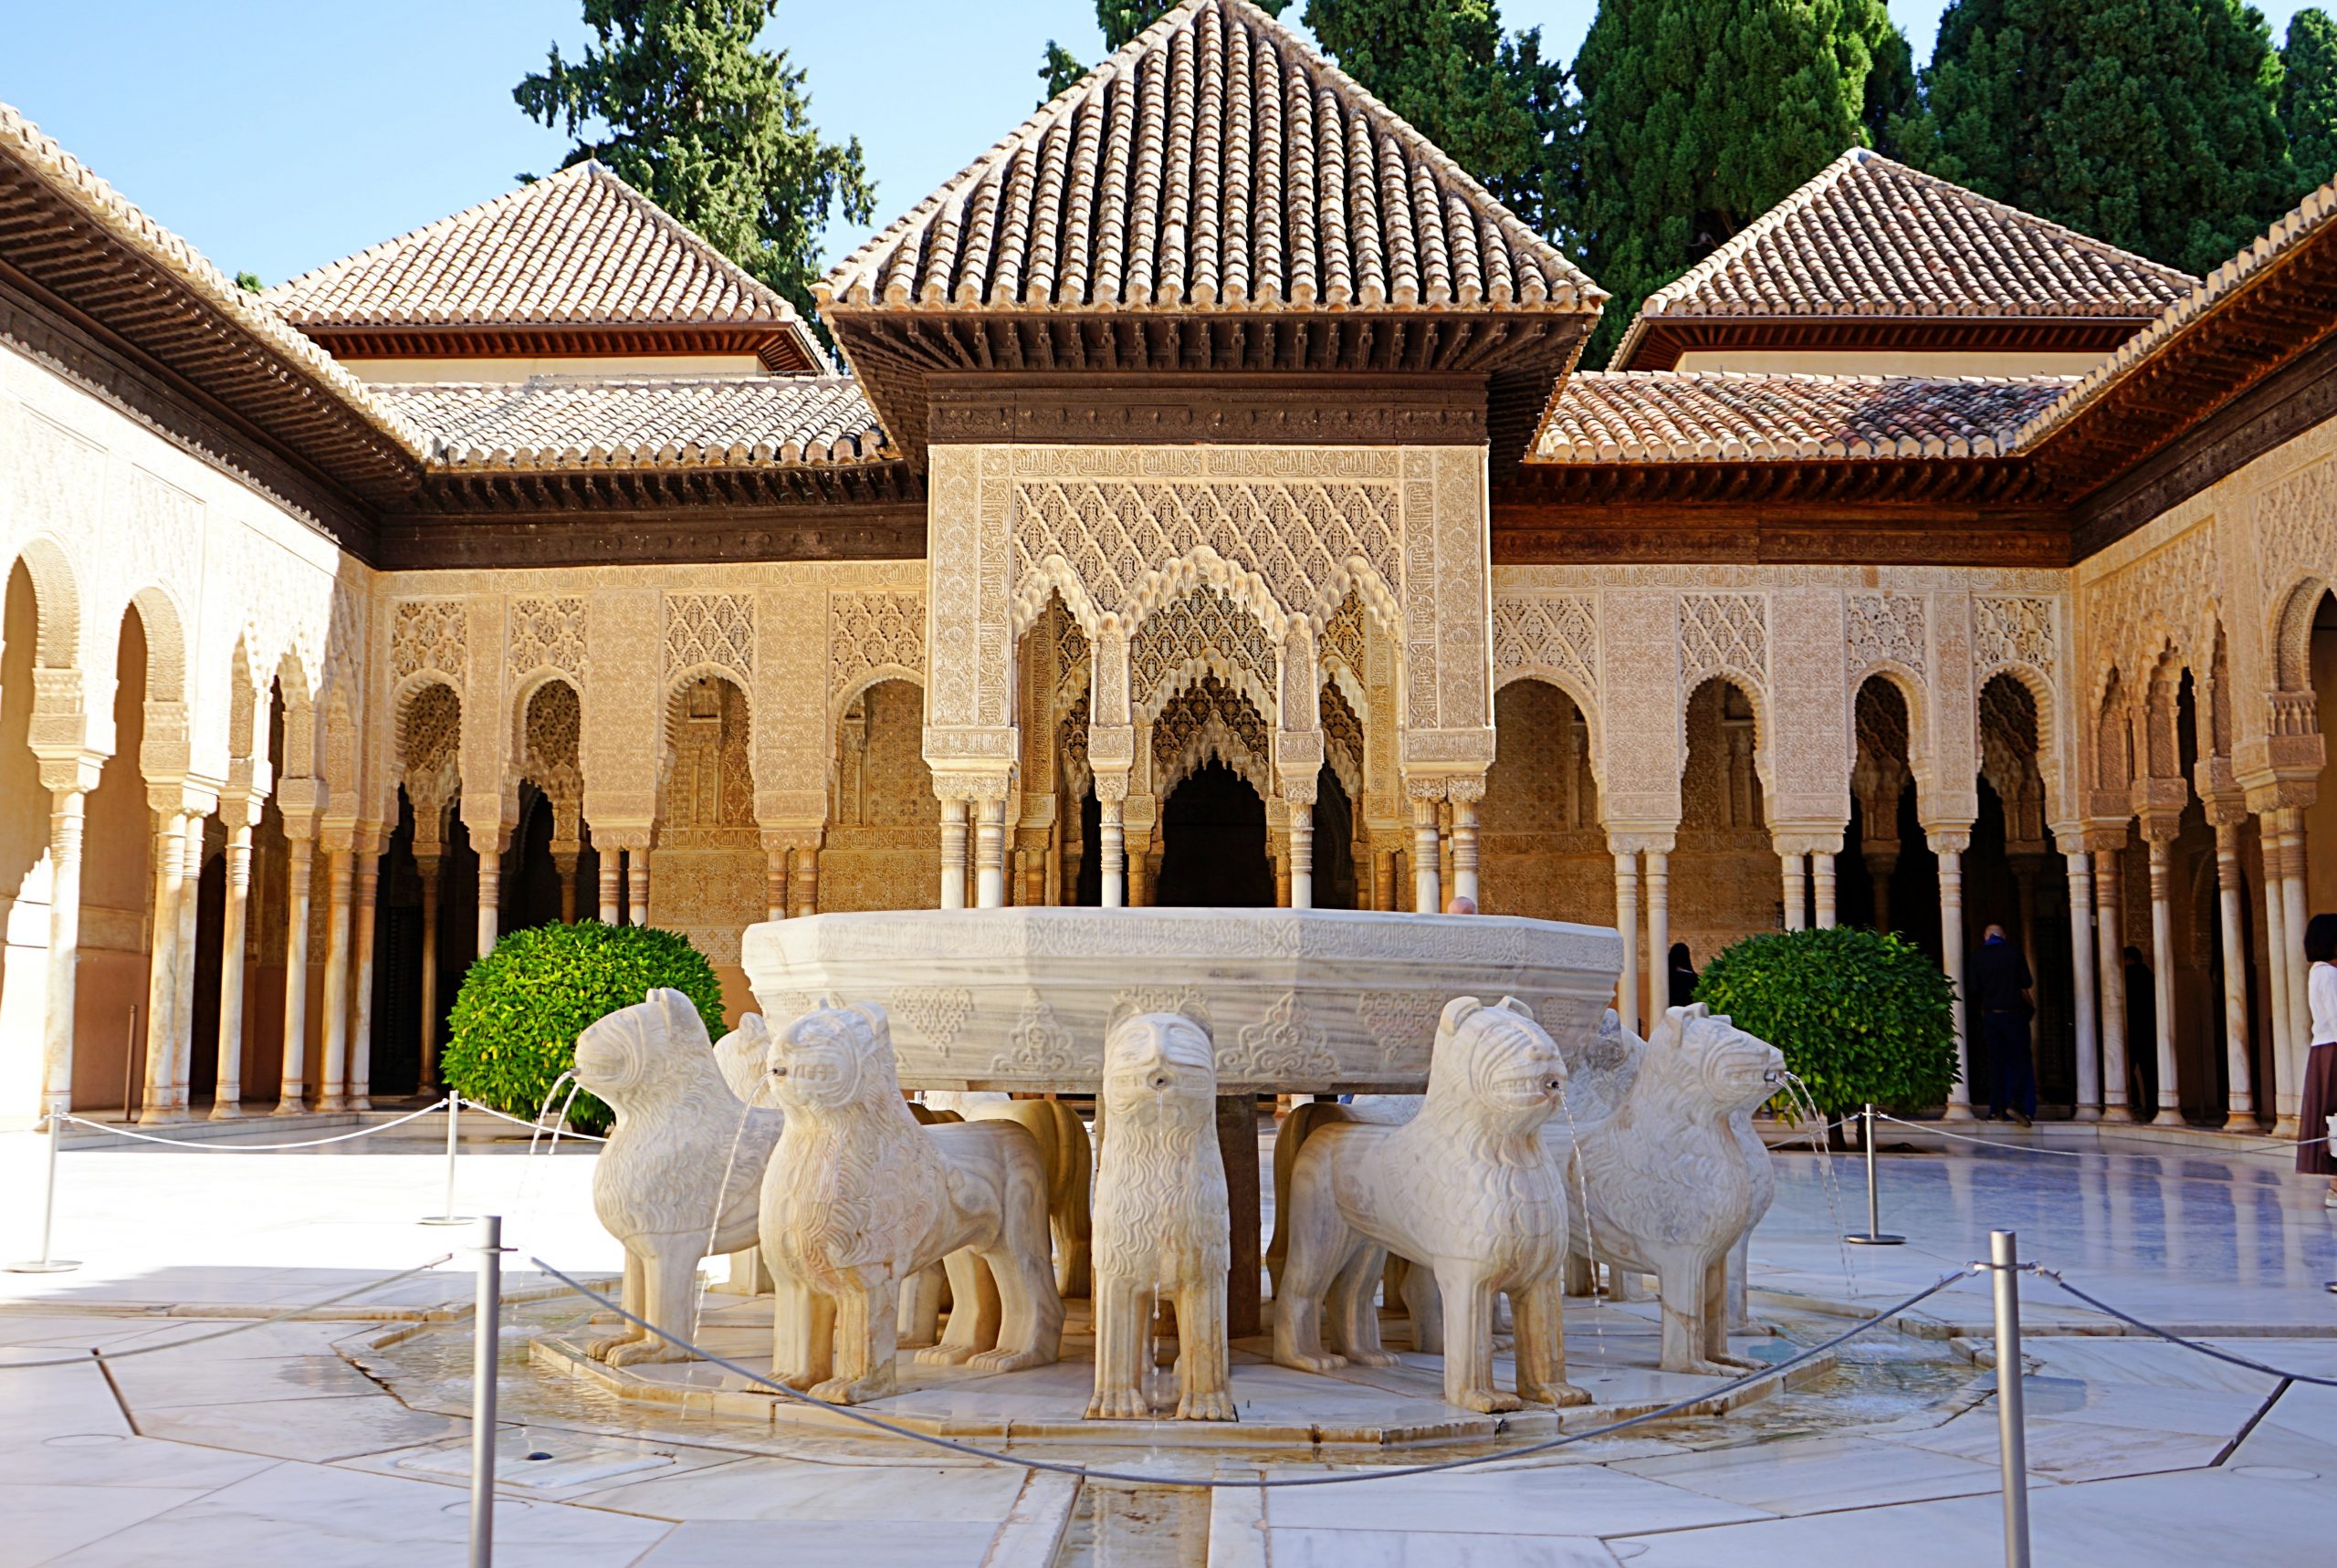 How To Visit The Alhambra |Last minute tickets - Jet Set Together